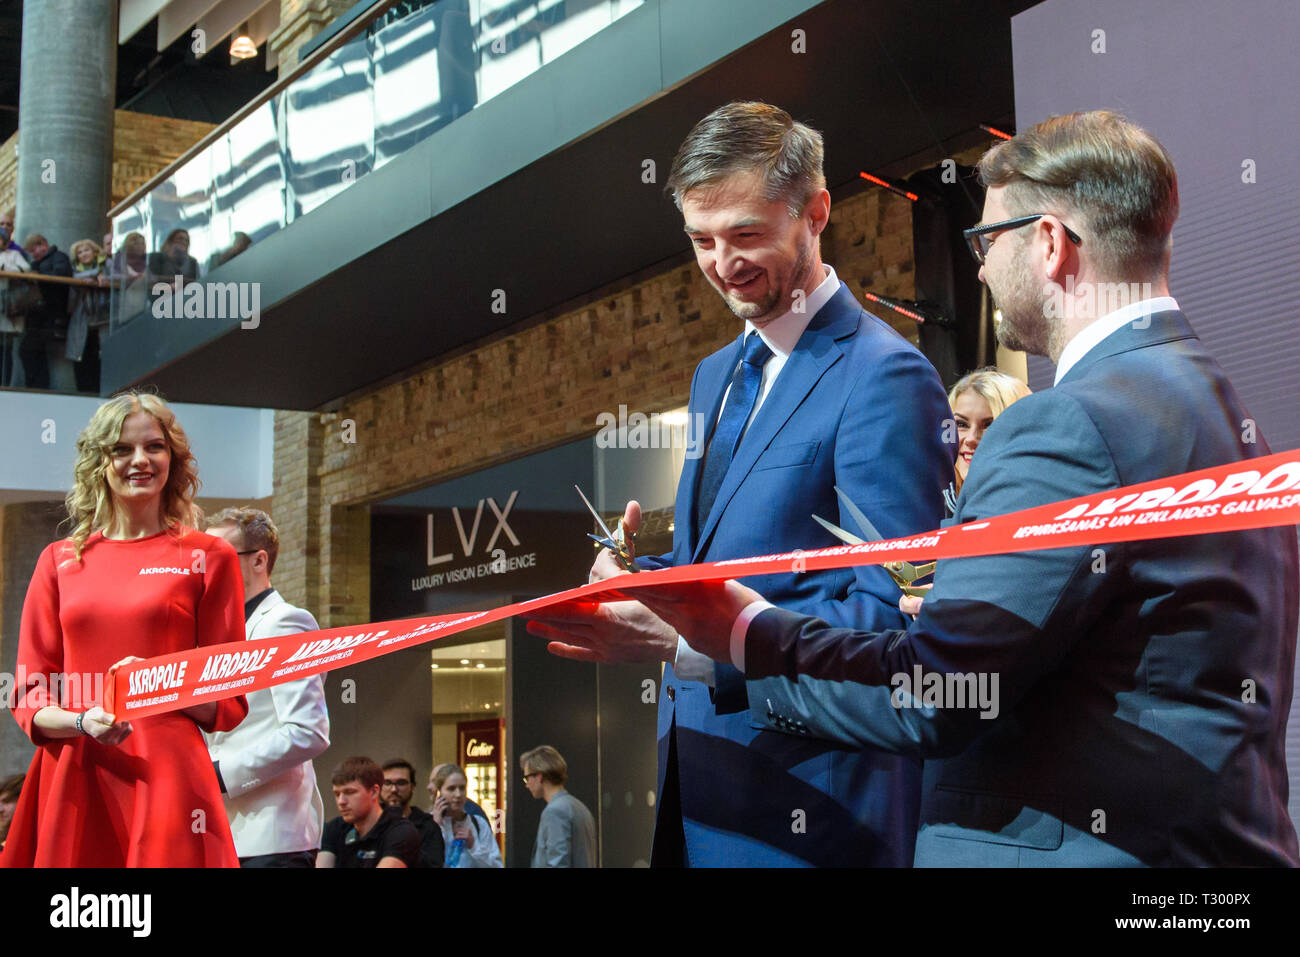 04.04.2019. RIGA, LATVIA.  Vytautas Labeckas CEO of Akropolis and Kaspars Beitins, CEO of SIA AKROPOLE RIGA  with red lente, during Akropole shopping  Stock Photo